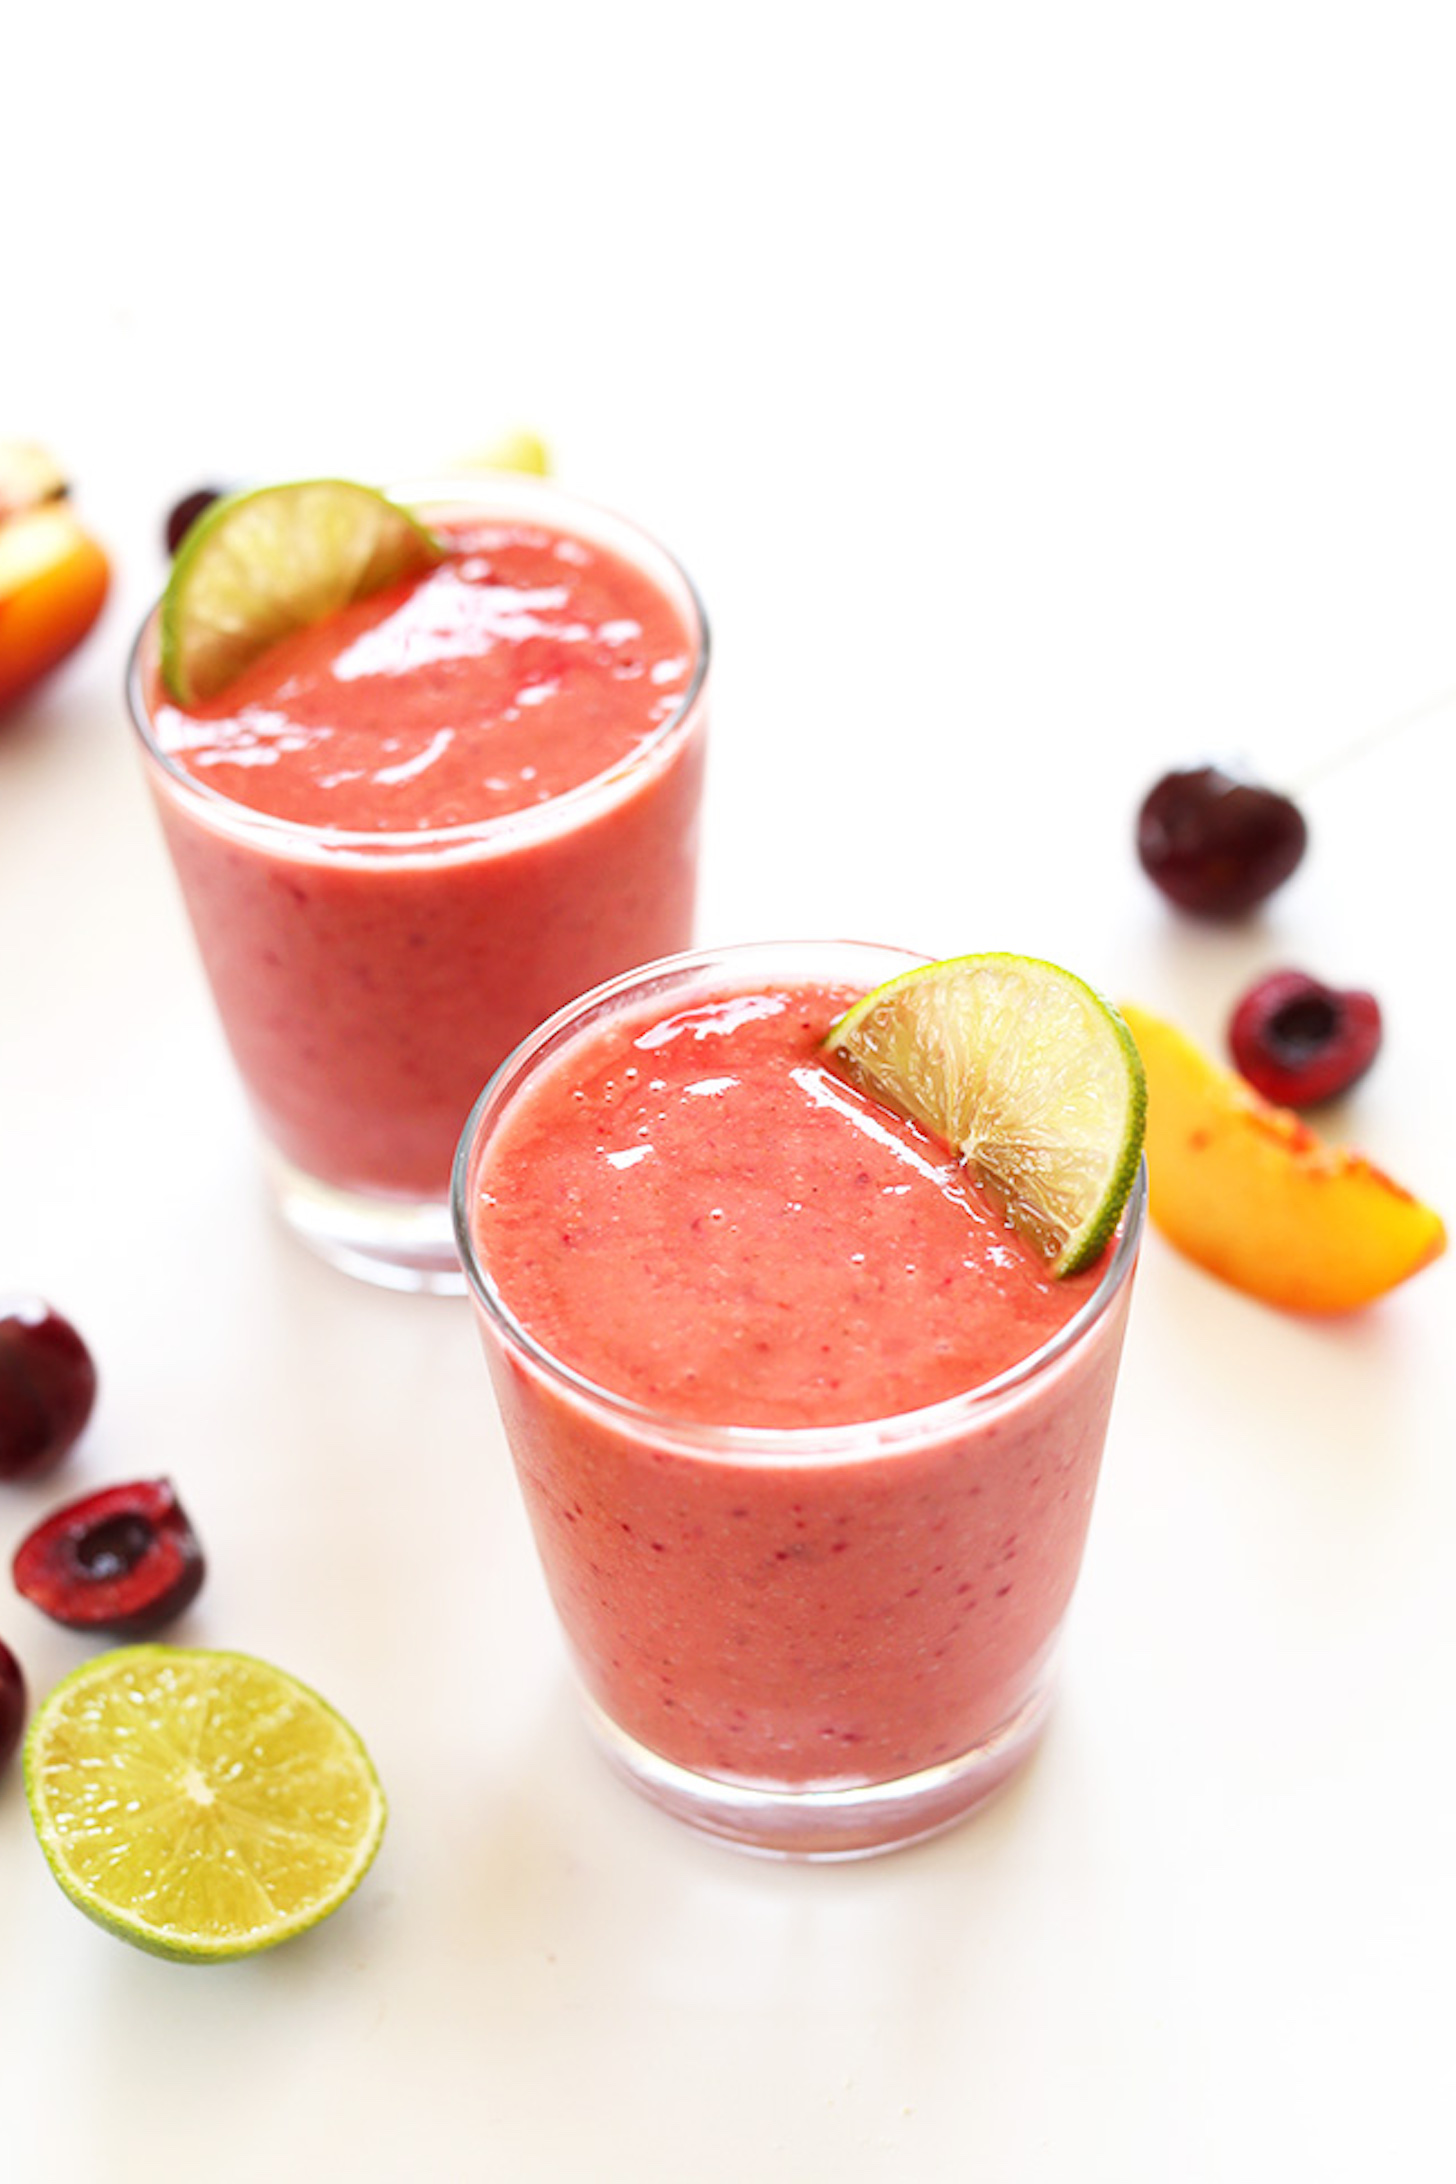 Elevate your toddler's nutrition with delicious smoothie recipes